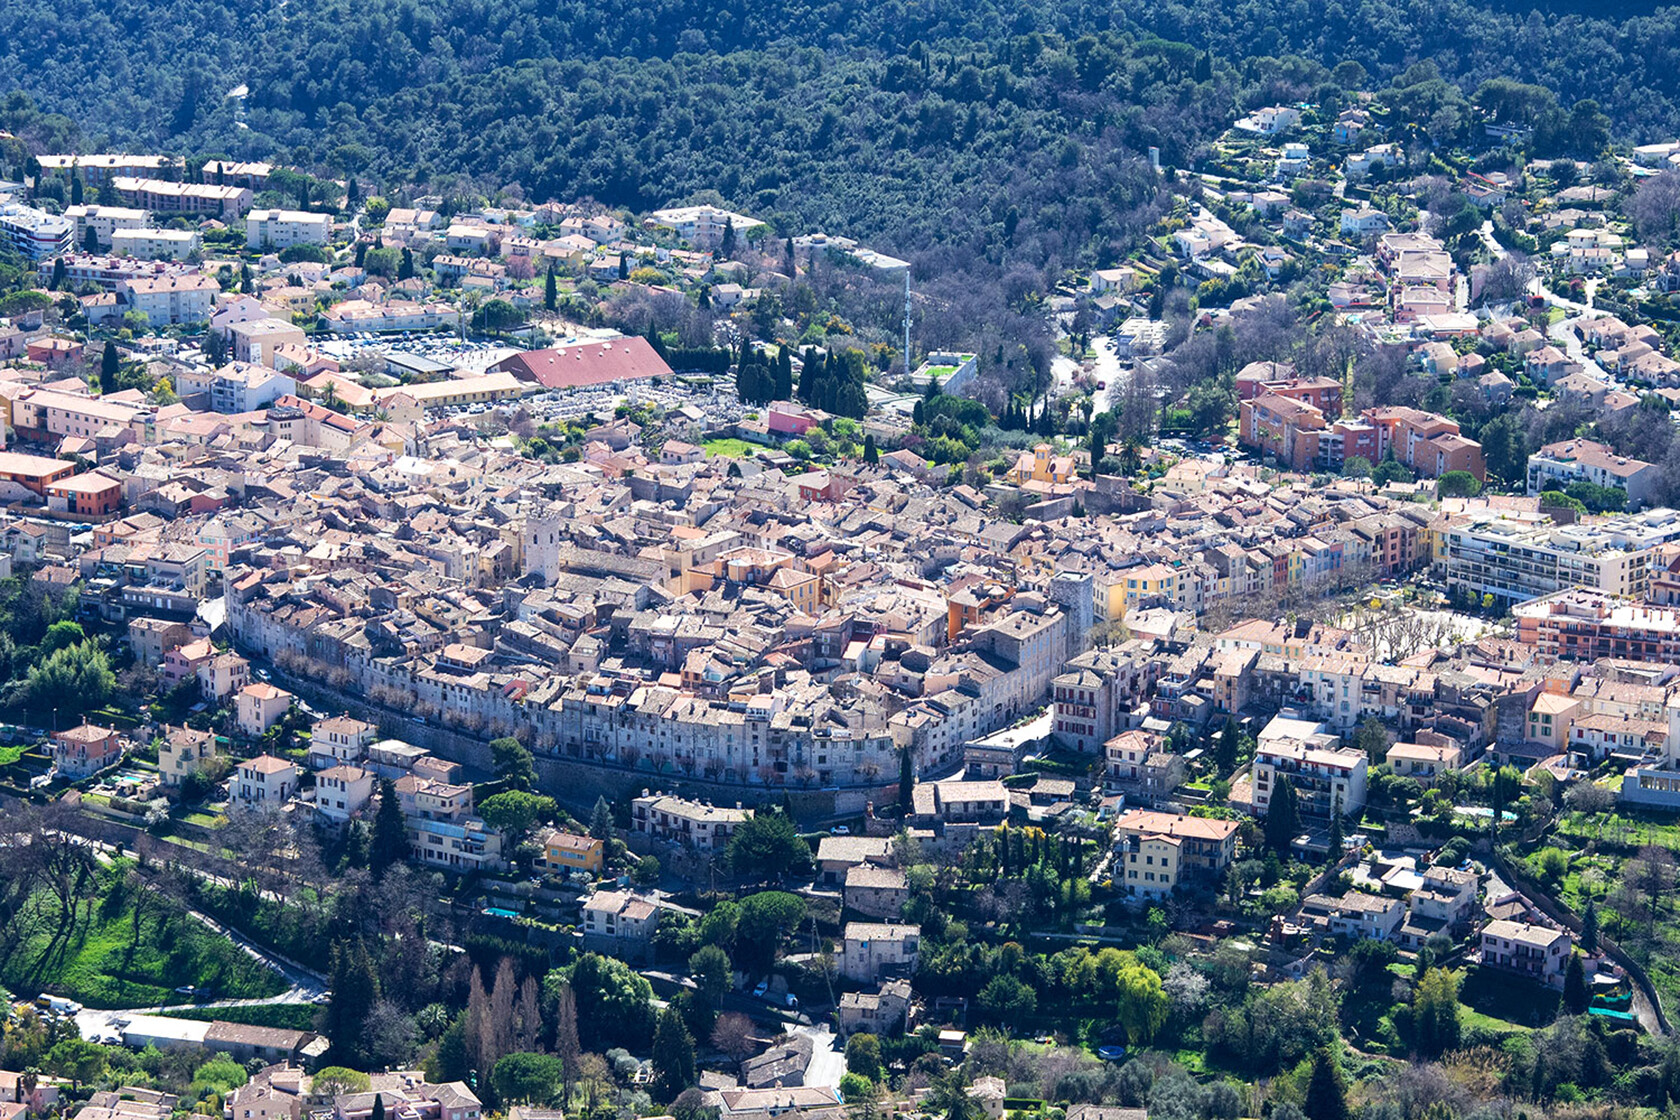 Looking down on Vence from the Baou des Blancs